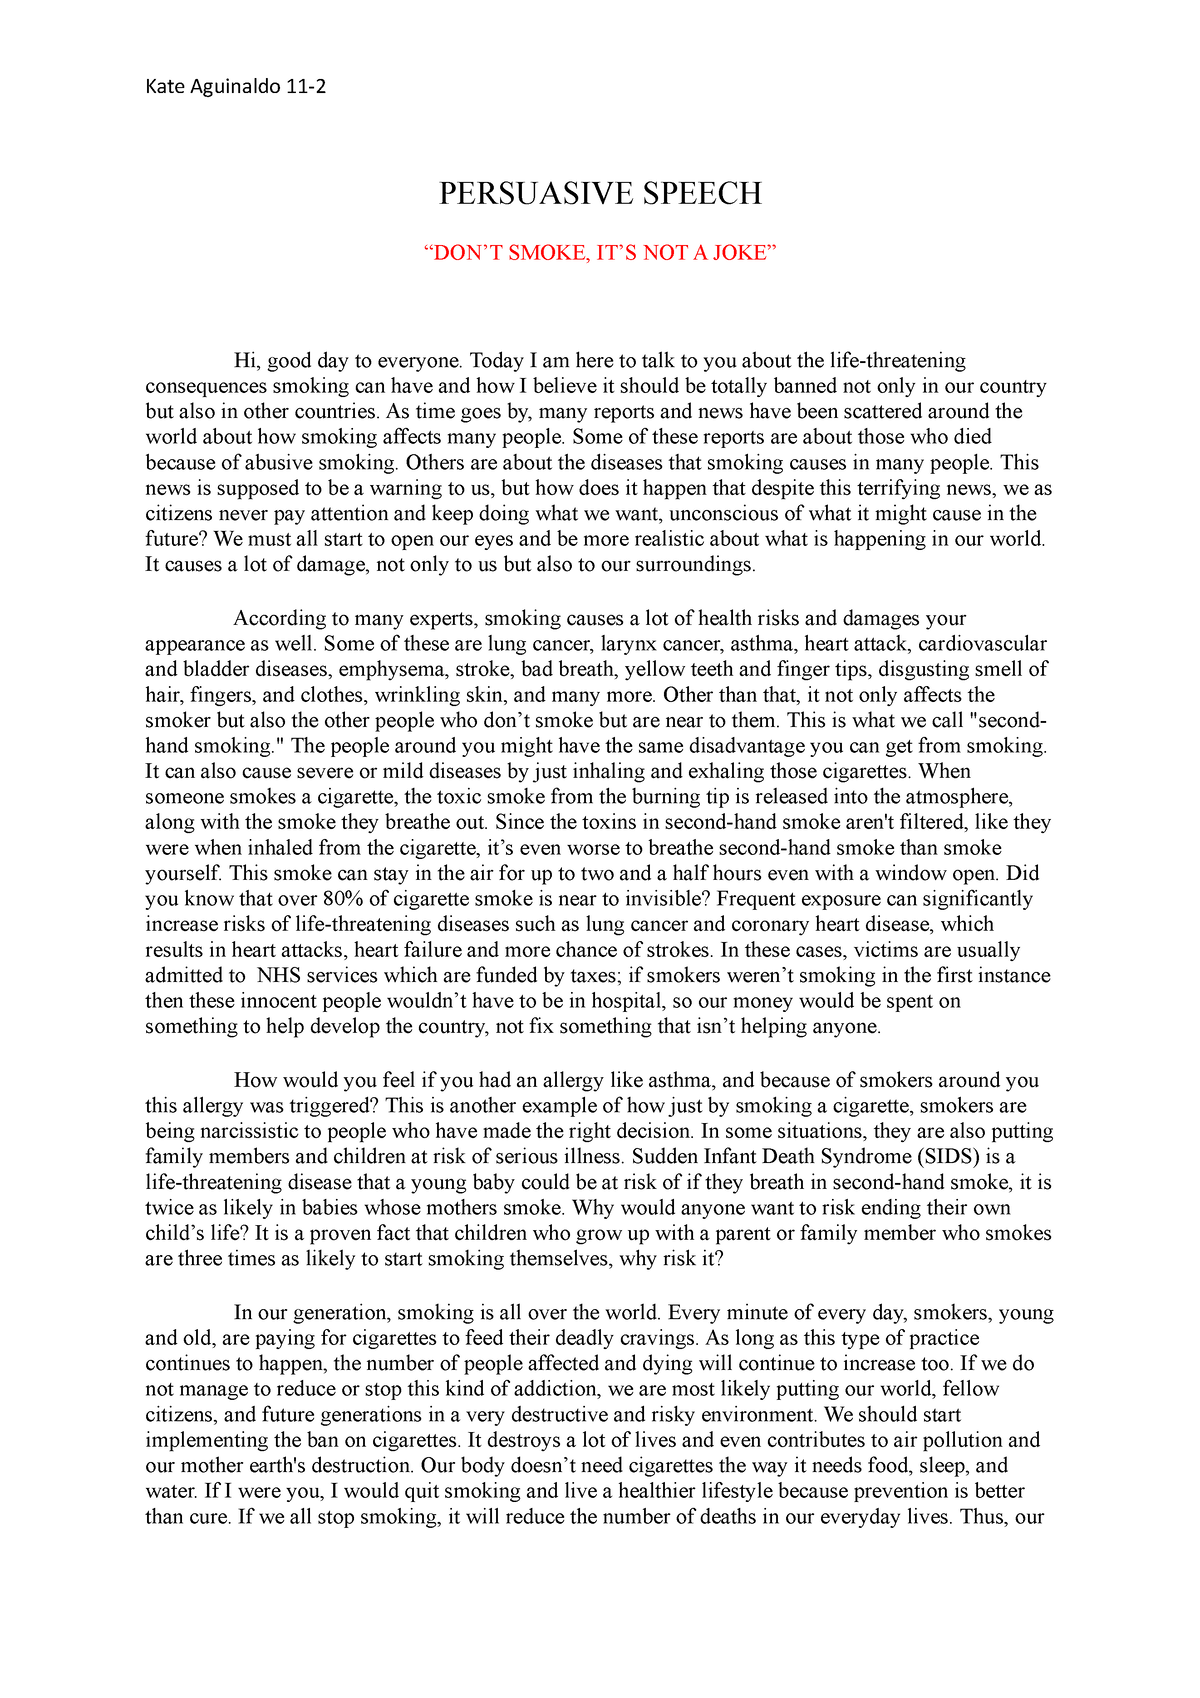 persuasive essay about secondhand smoke